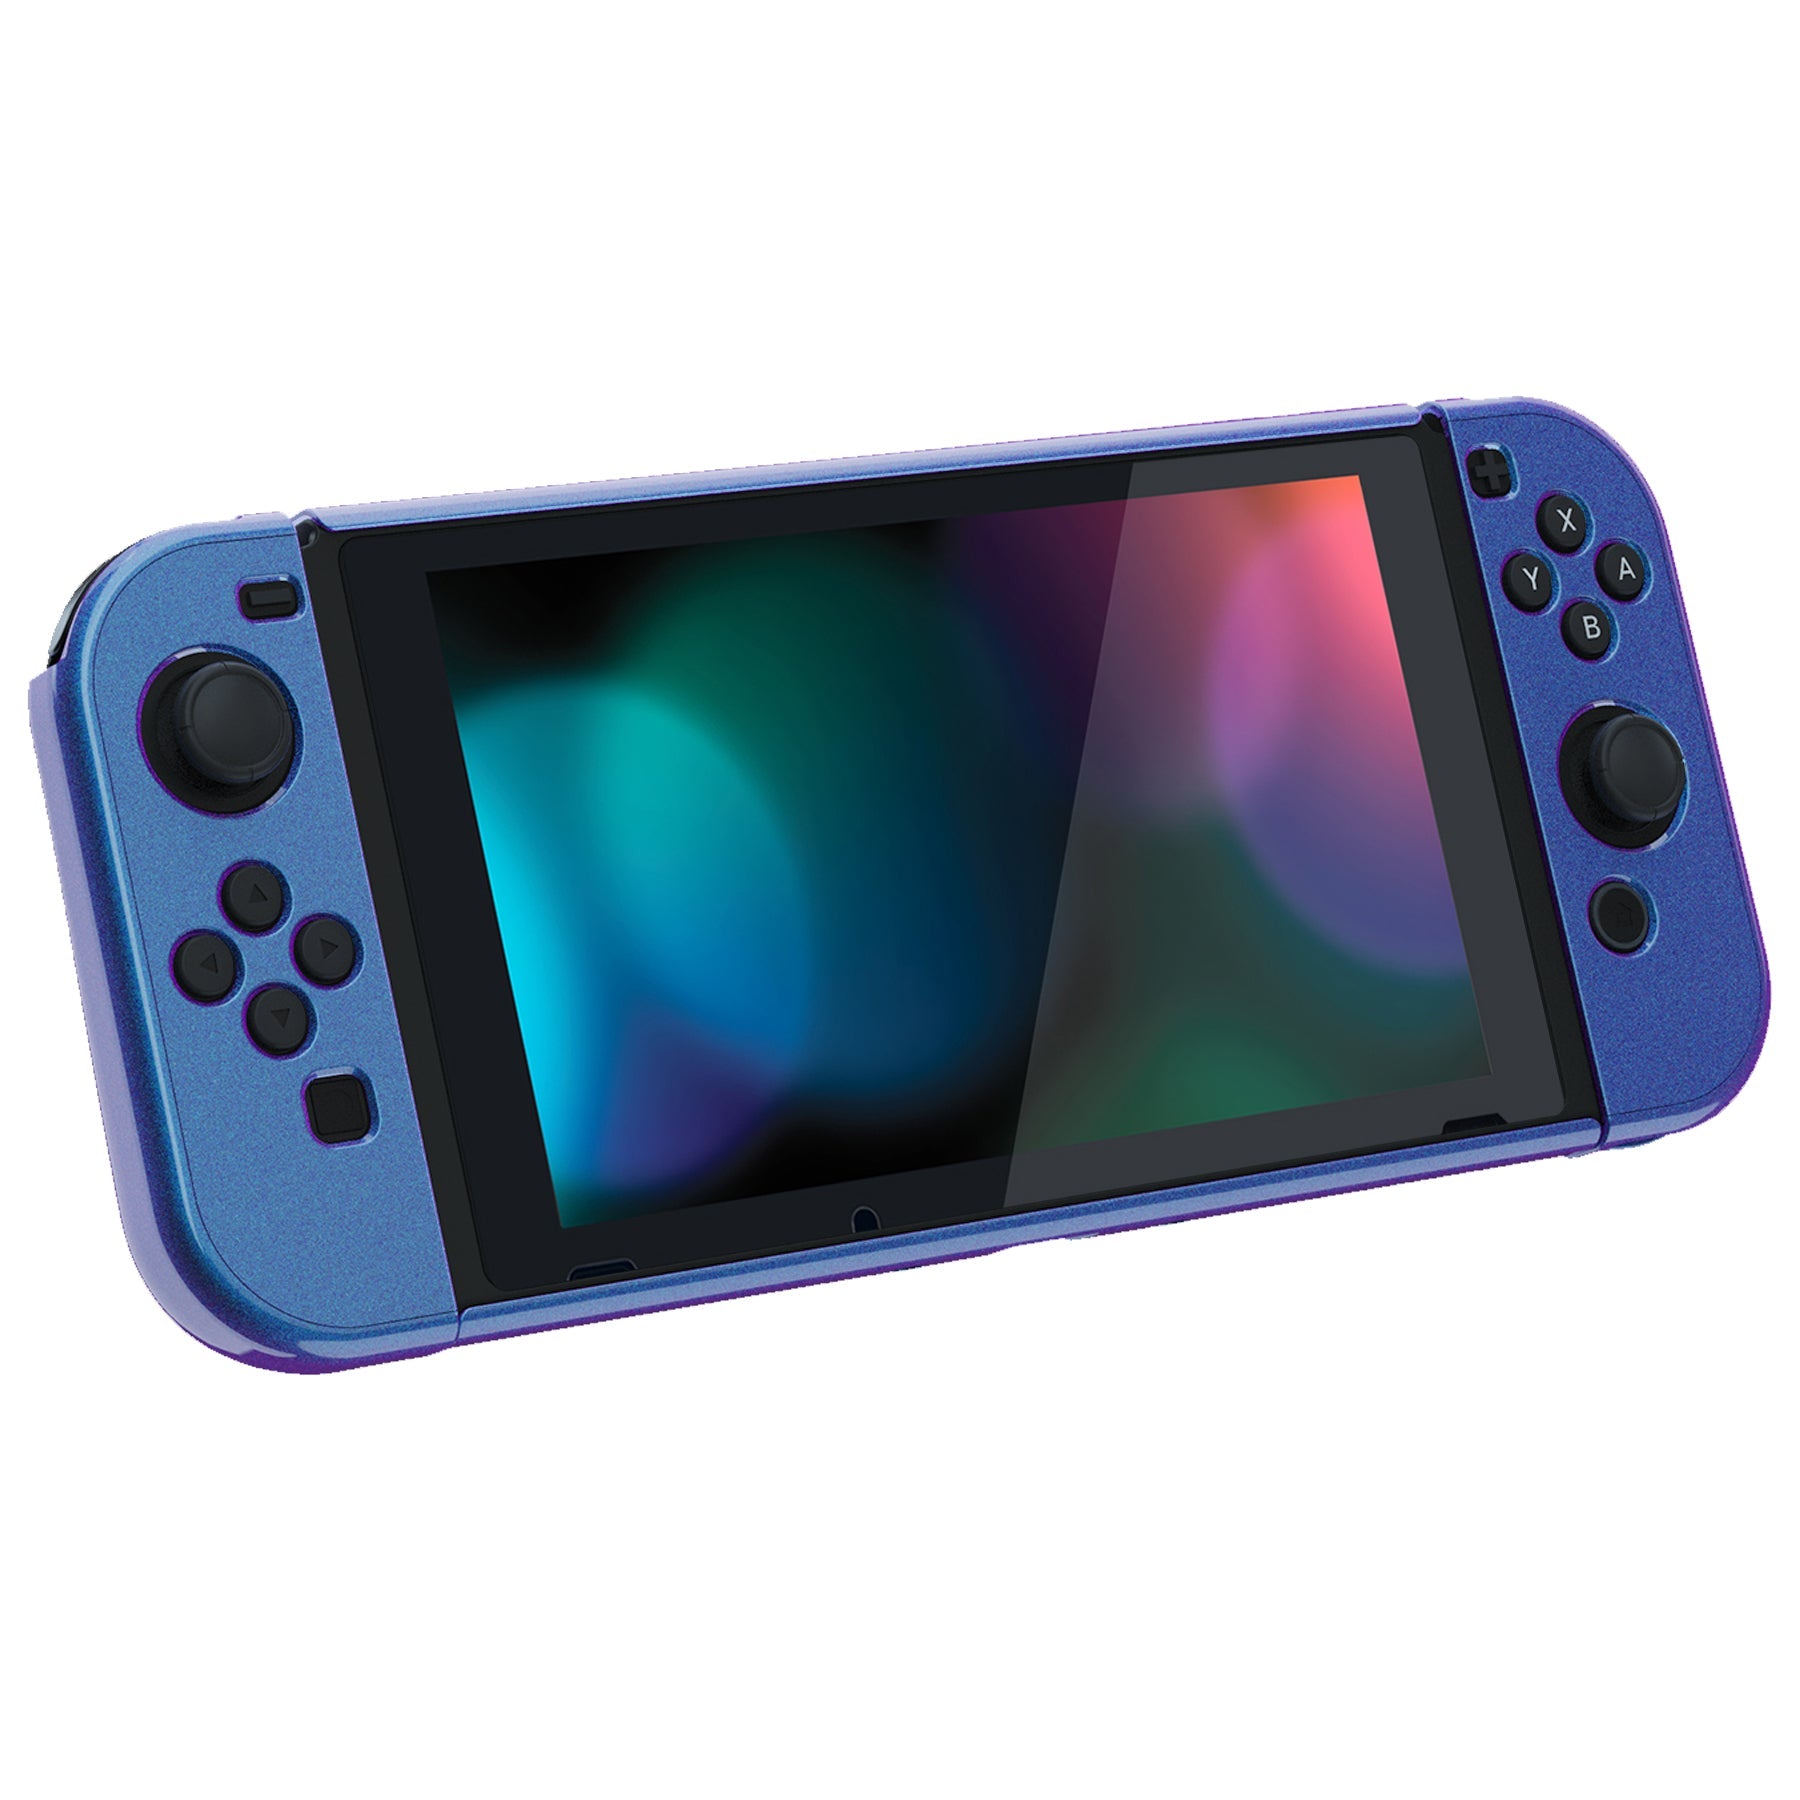 PlayVital UPGRADED Glossy Dockable Case Grip Cover for NS Switch, Ergonomic Protective Case for NS Switch, Separable Protector Hard Shell for Joycon - Chameleon Purple Blue - ANSP3001 PlayVital